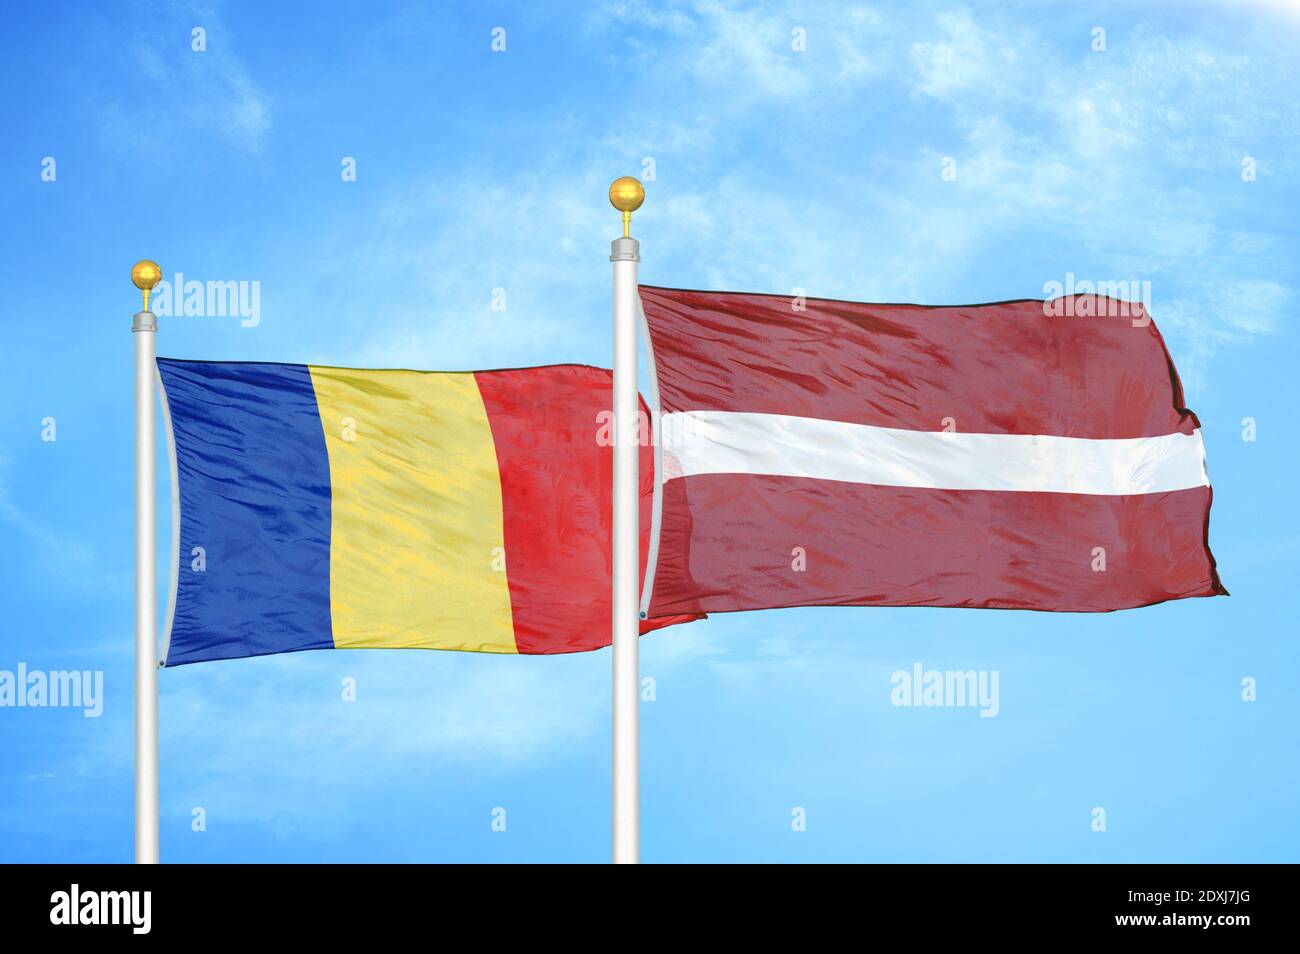 Romania and Latvia two flags on flagpoles and blue sky Stock Photo